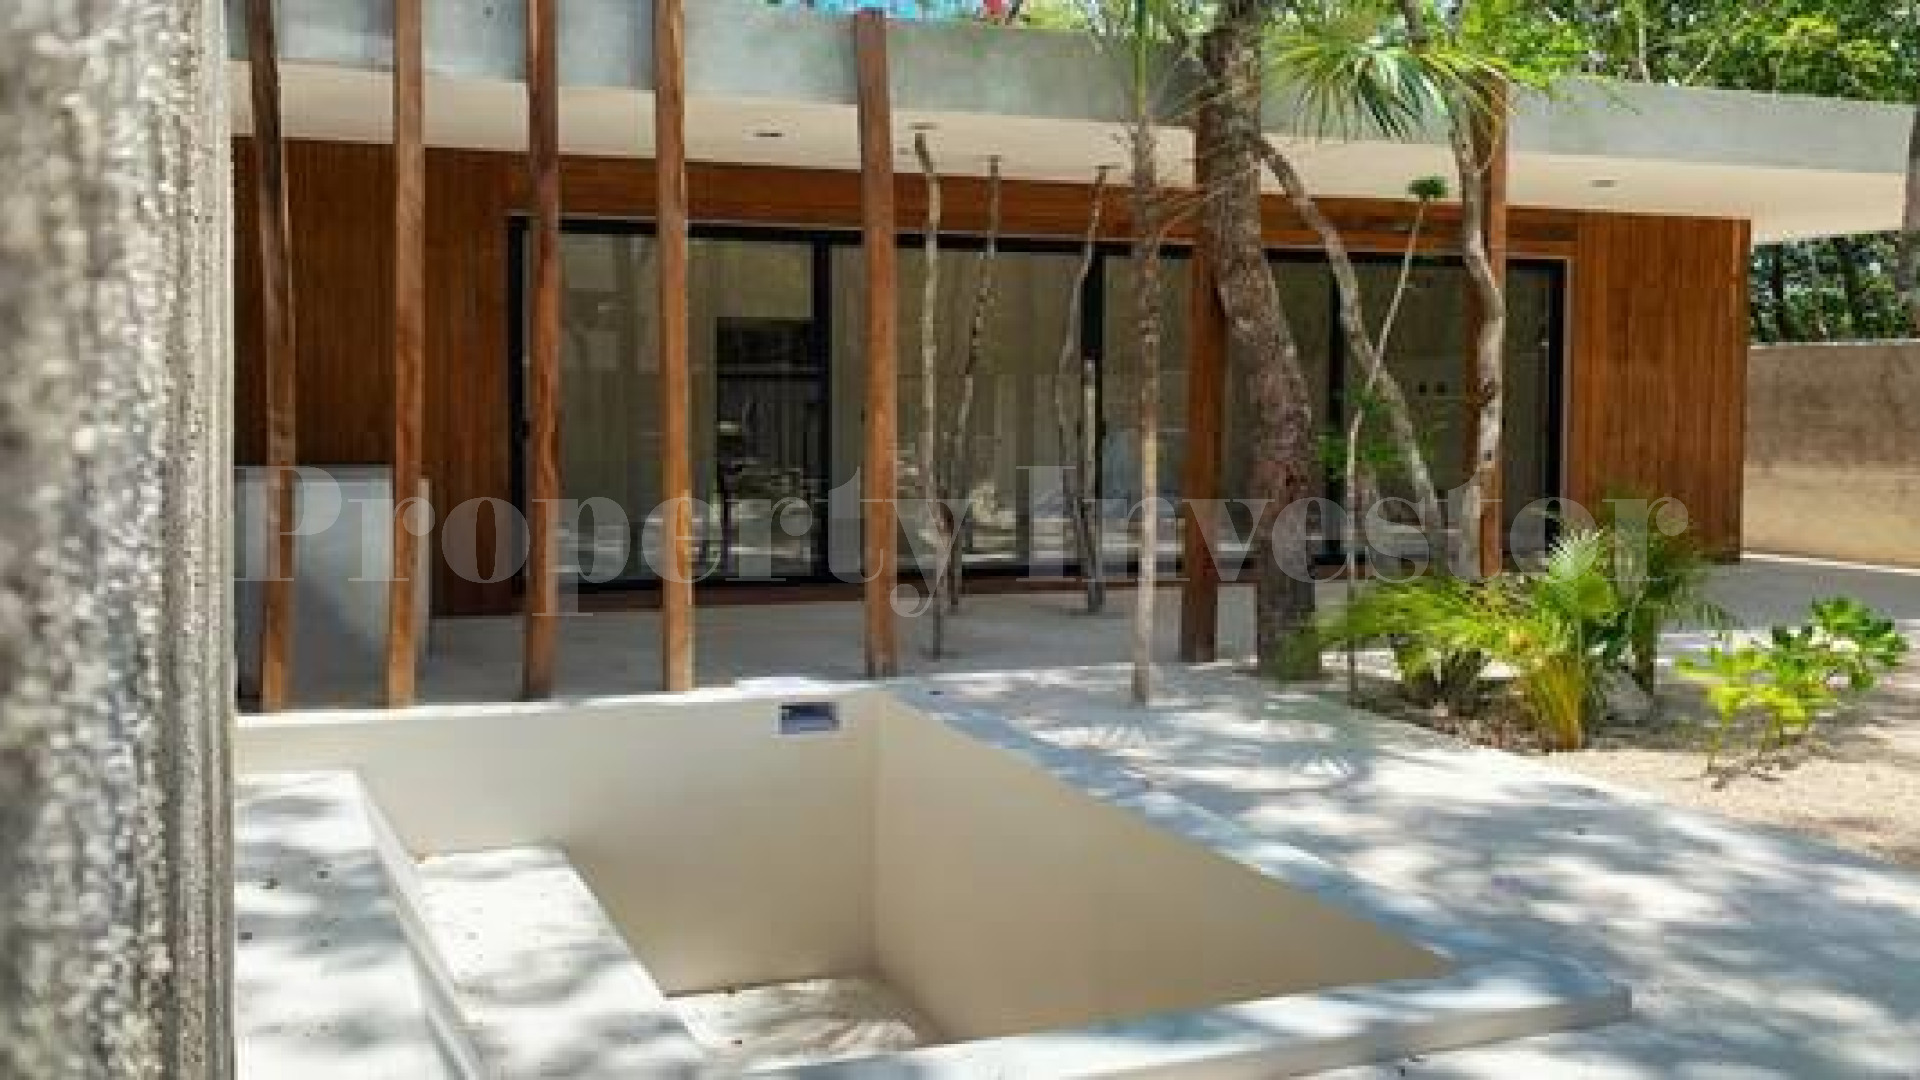 Fabulous 2 Bedroom Private Luxury Jungle Villa with Plunge Pool for Sale Near Tulum, Mexico